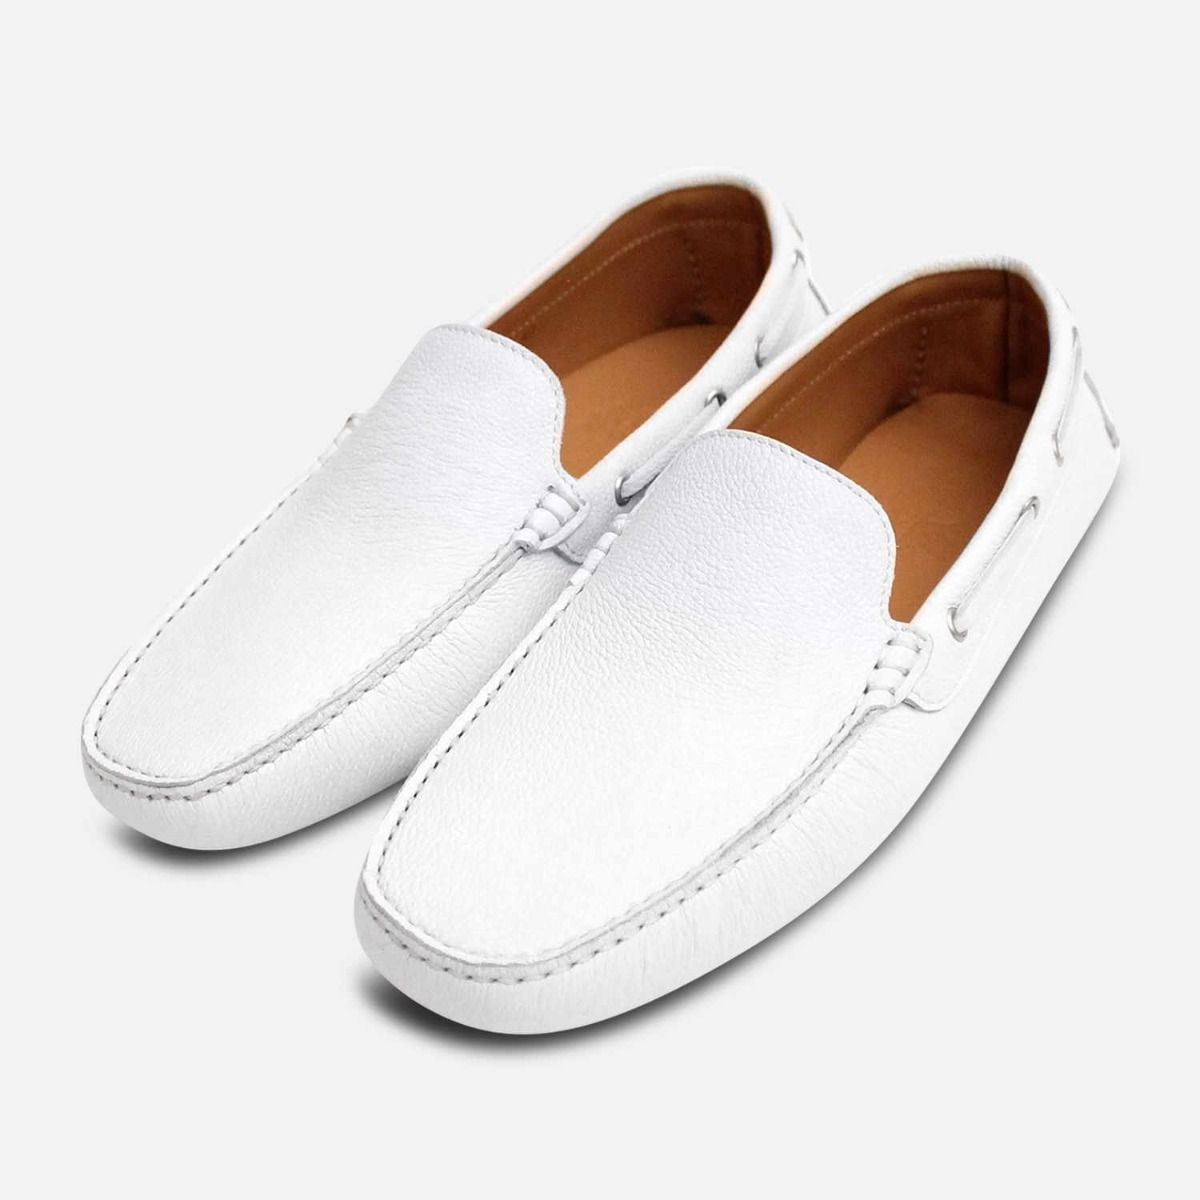 Shoes Moccasins Vagabond Moccasins natural white business style 